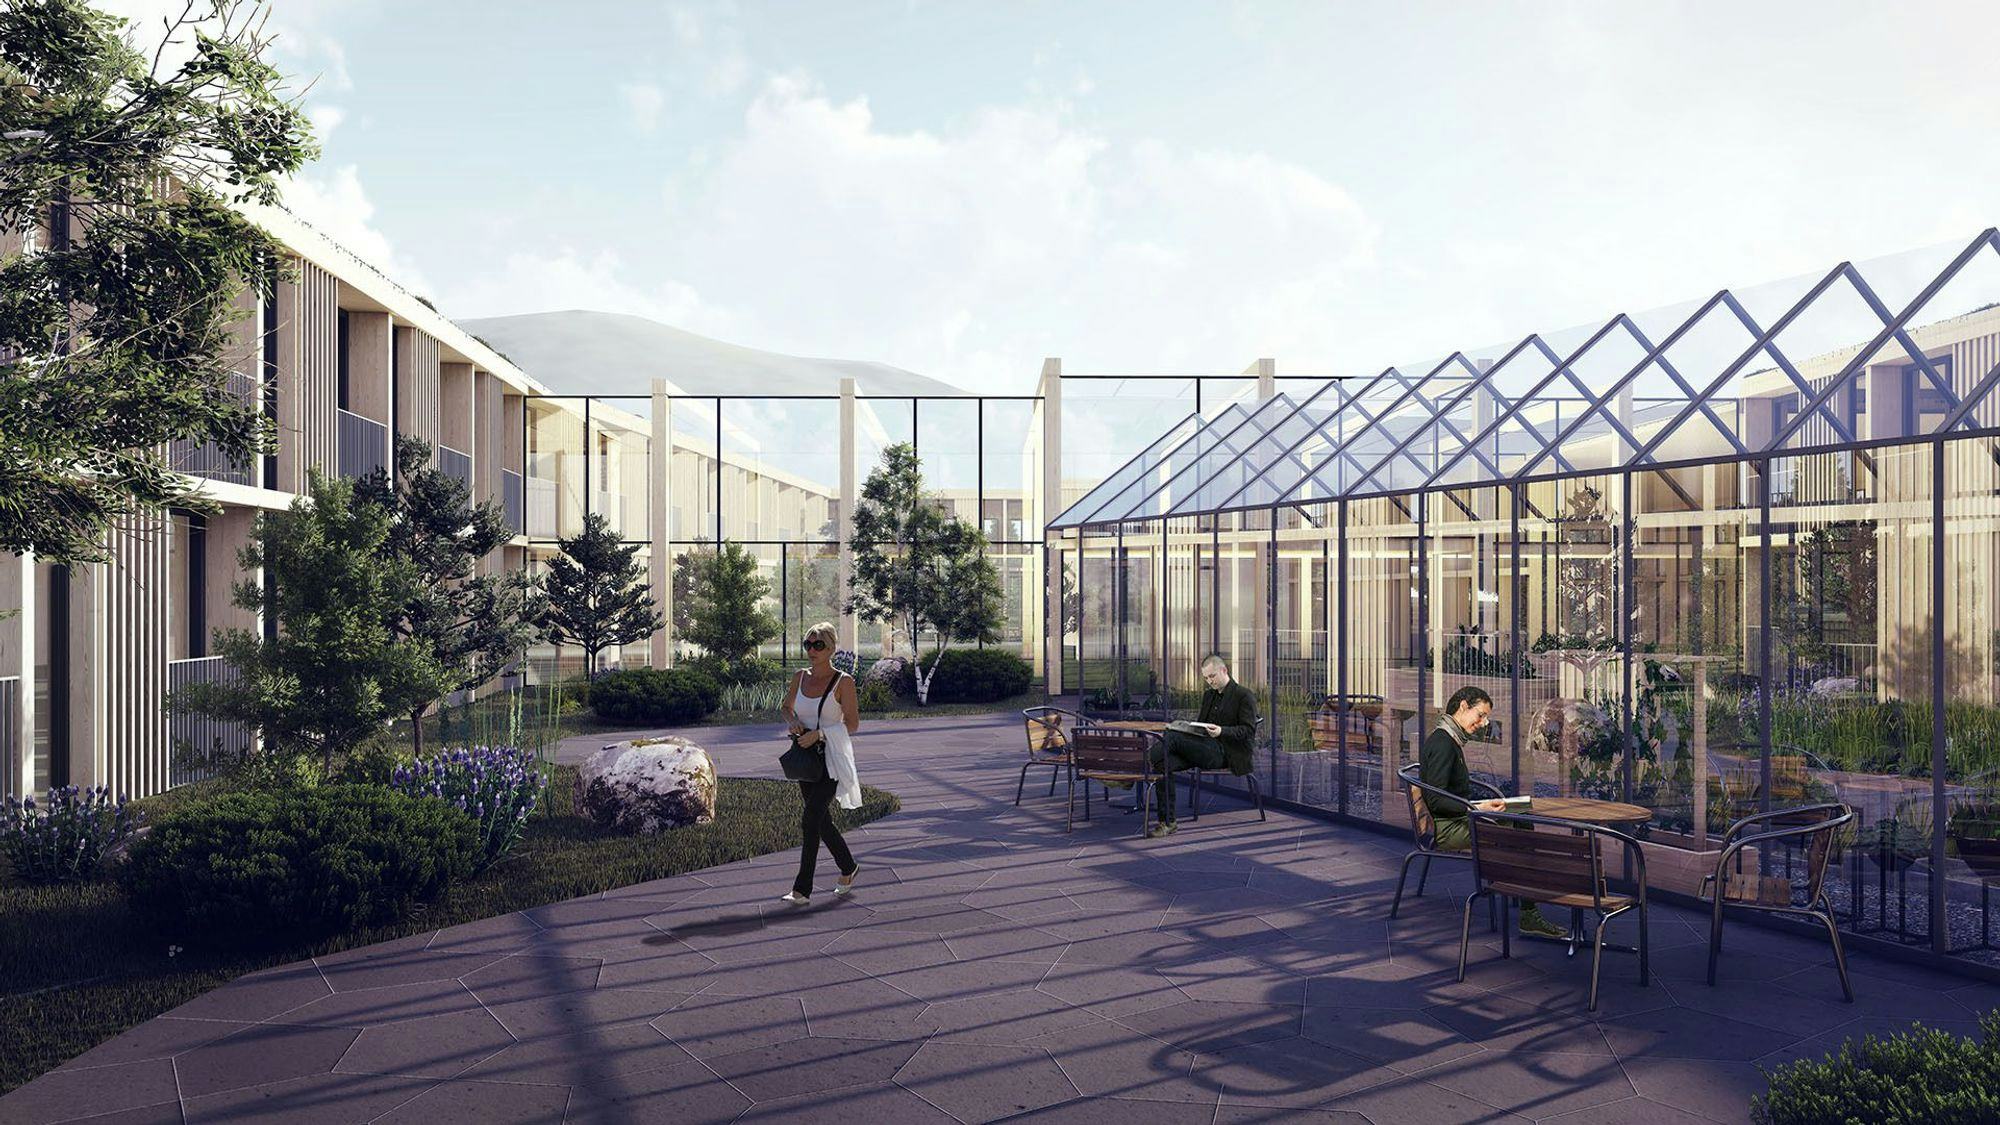 3D model of an outdoor setting with people walking and sitting at tables adjacent to a modern glass greenhouse